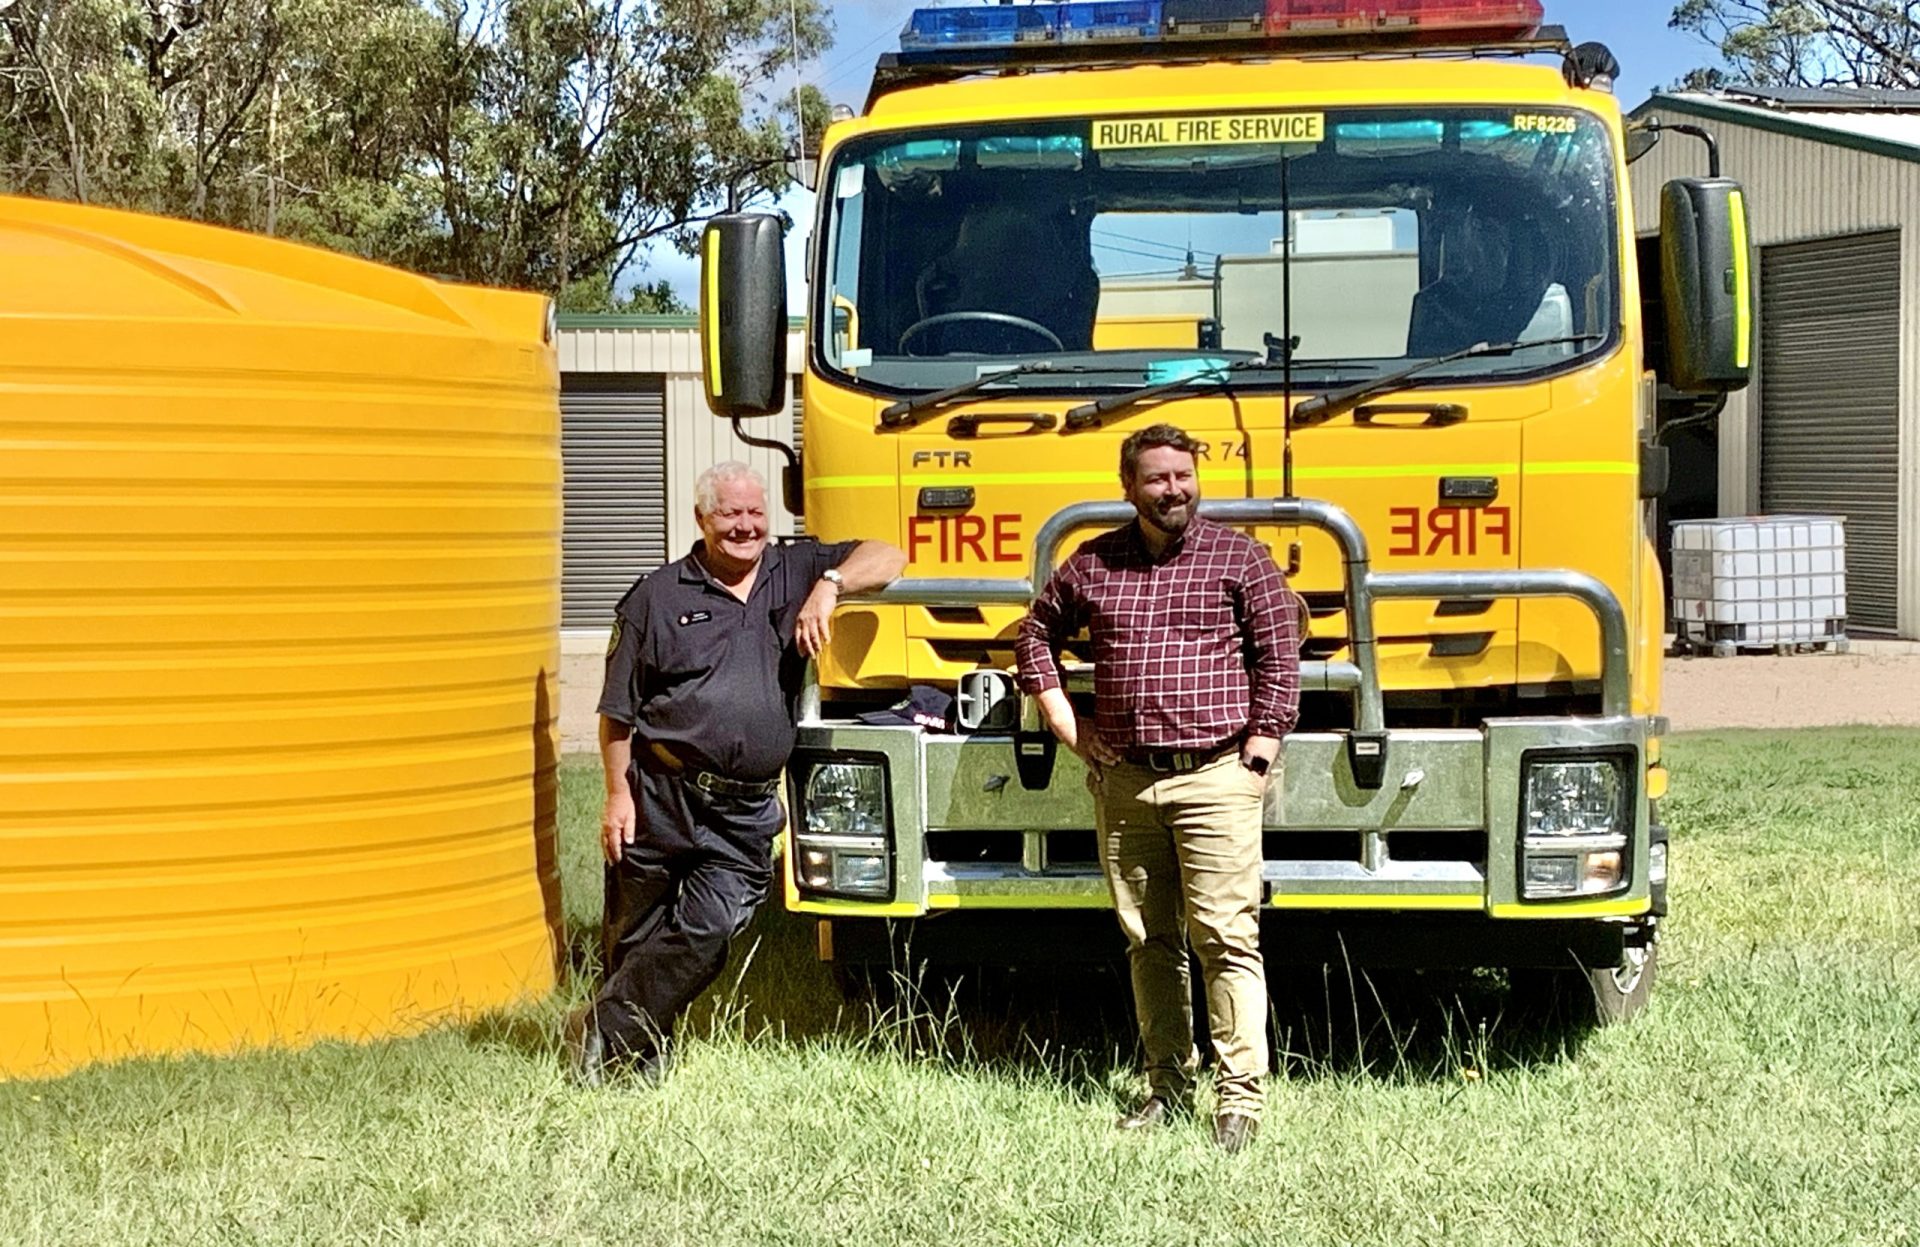 Additional water tanks are now located at Applethorpe Rural Fire Station and ready to be used for this fire season. Two 22,500 litre water storage tanks have now been installed […]